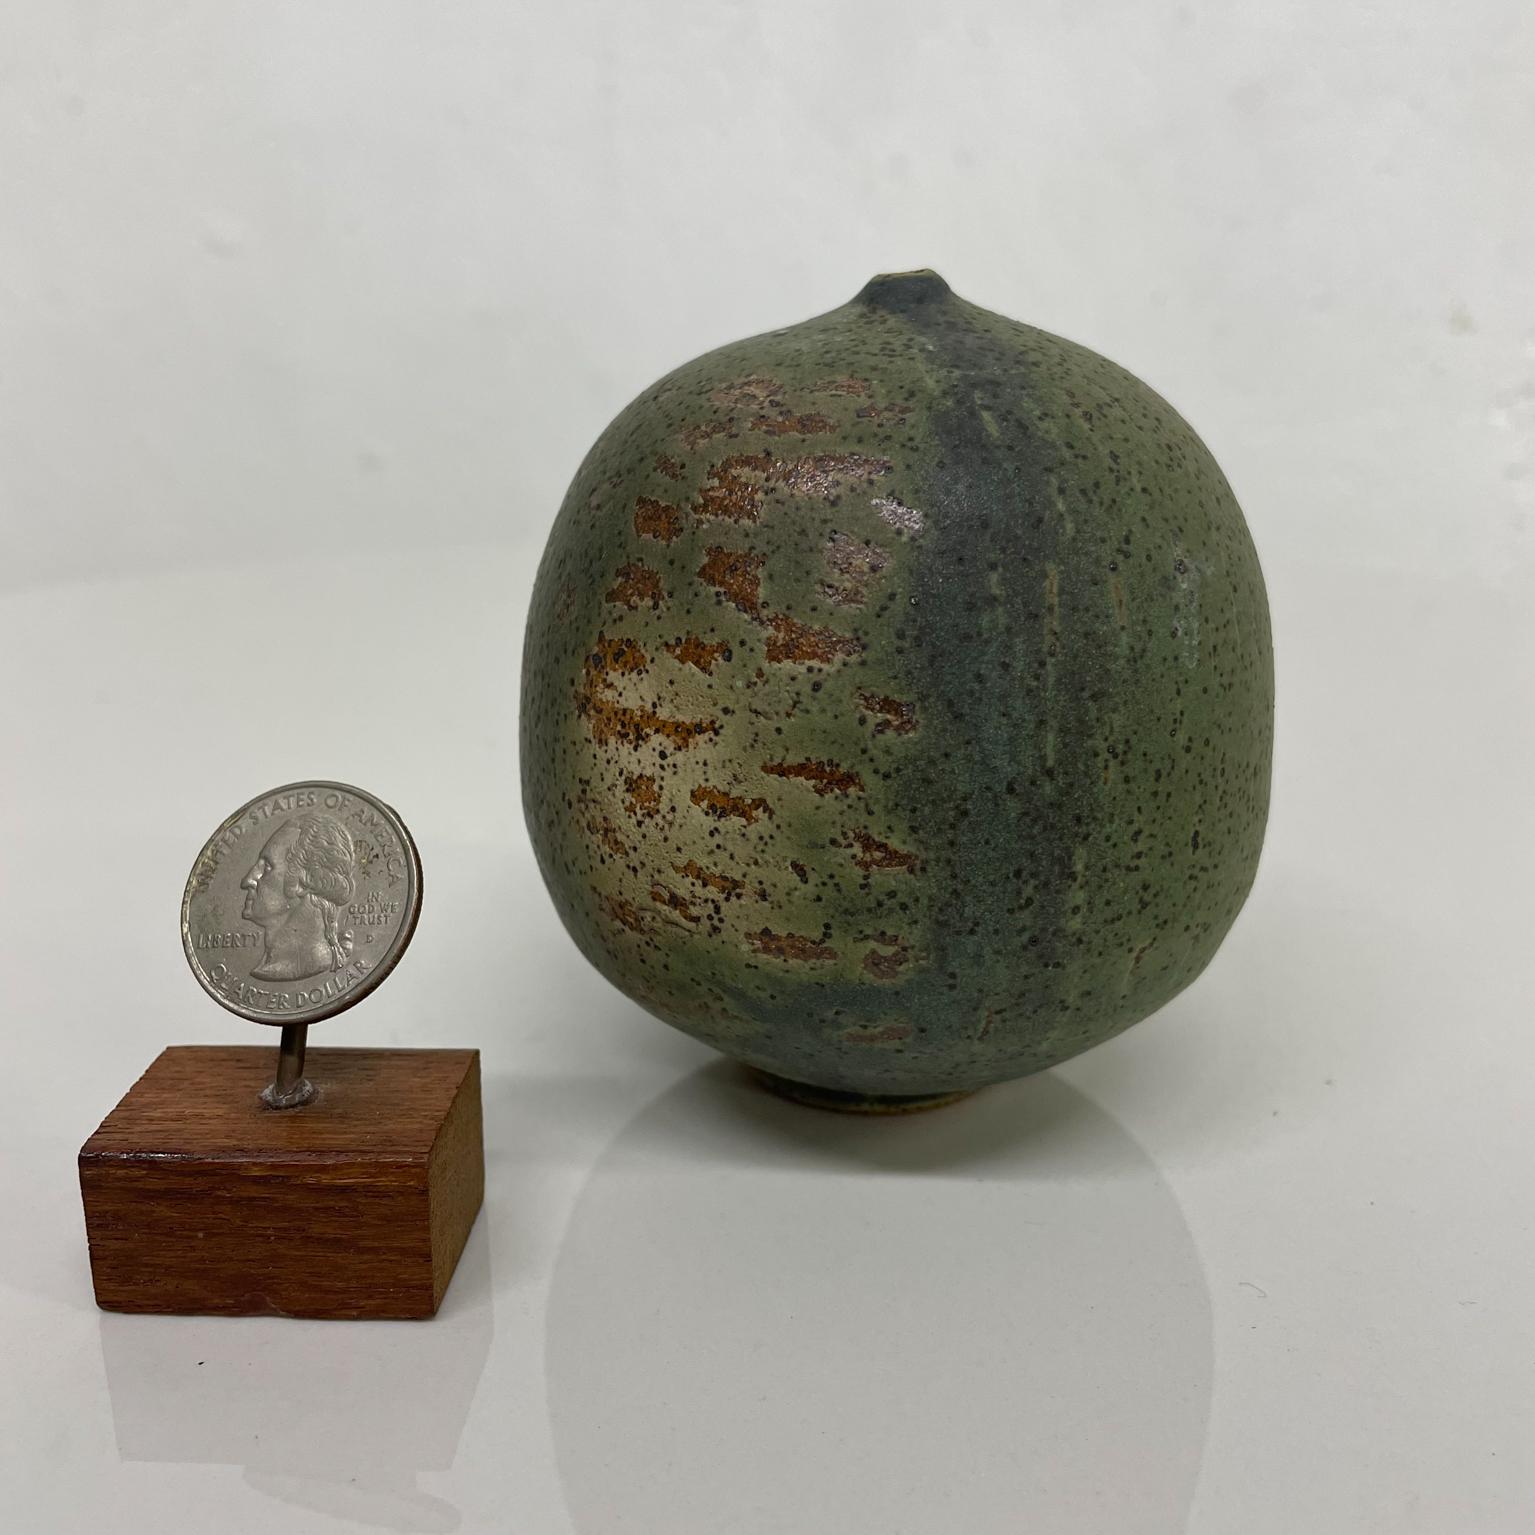 Vessel vase
Mini Weed Pot Bud Vase Stoneware Pottery Fire Glazed tones.
Speckled Texture Green Bronze tones Mini Weed Pot Style of Rose Cabat Feelie Vase 1970s California
Stamped on bottom. Unable to read signature.
3.25 diameter x 3.5 tall
Original